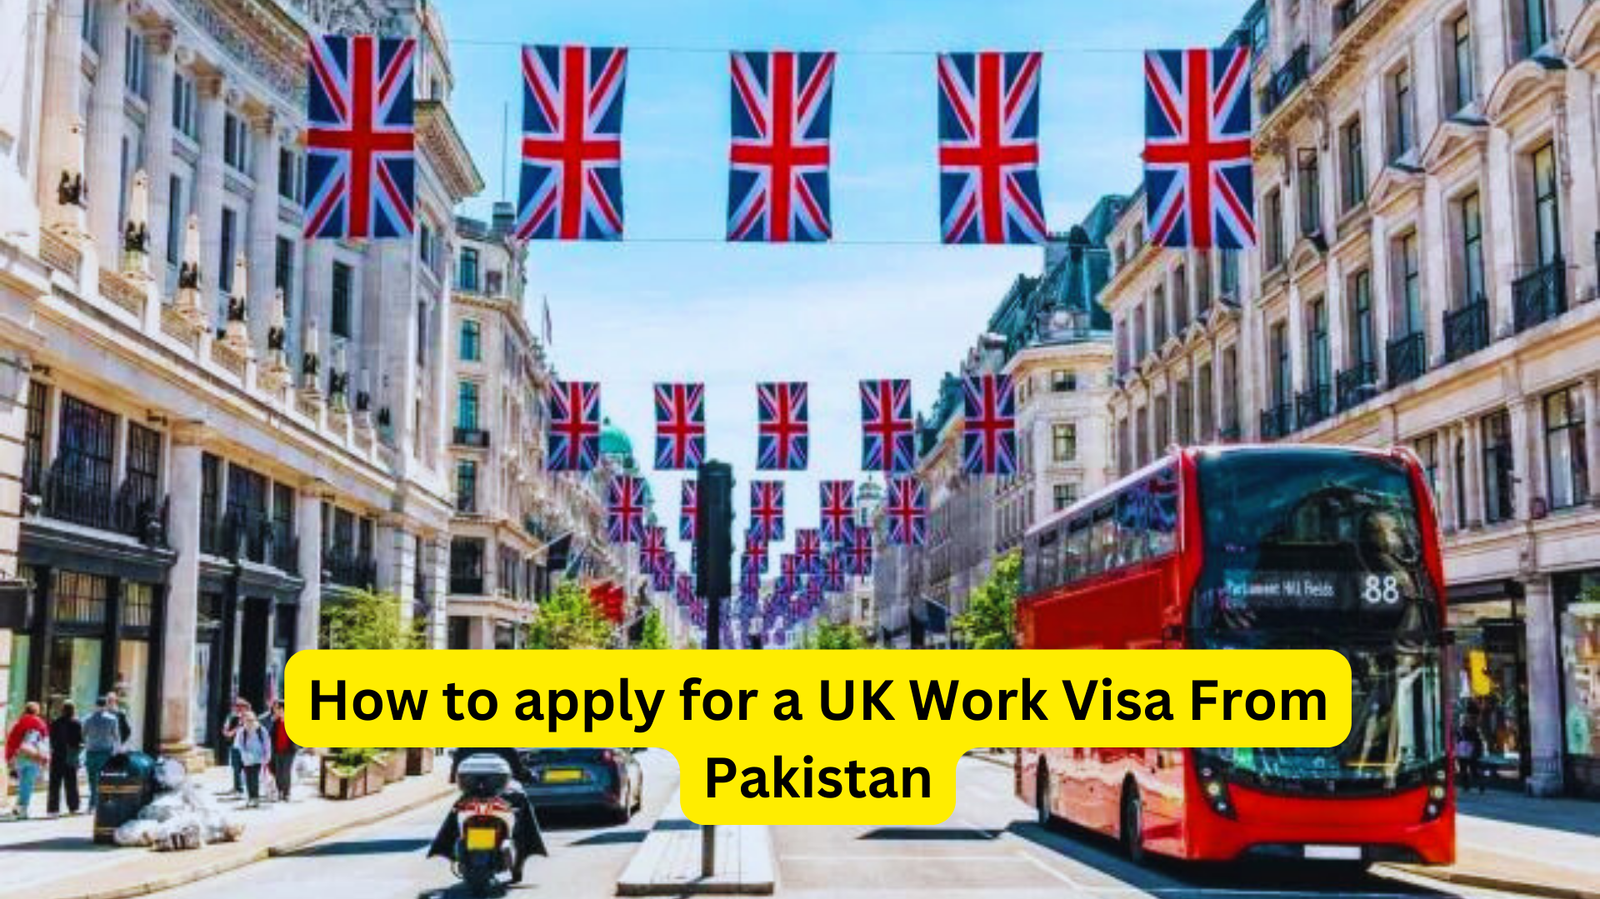 How to apply for a UK Work Visa From Pakistan